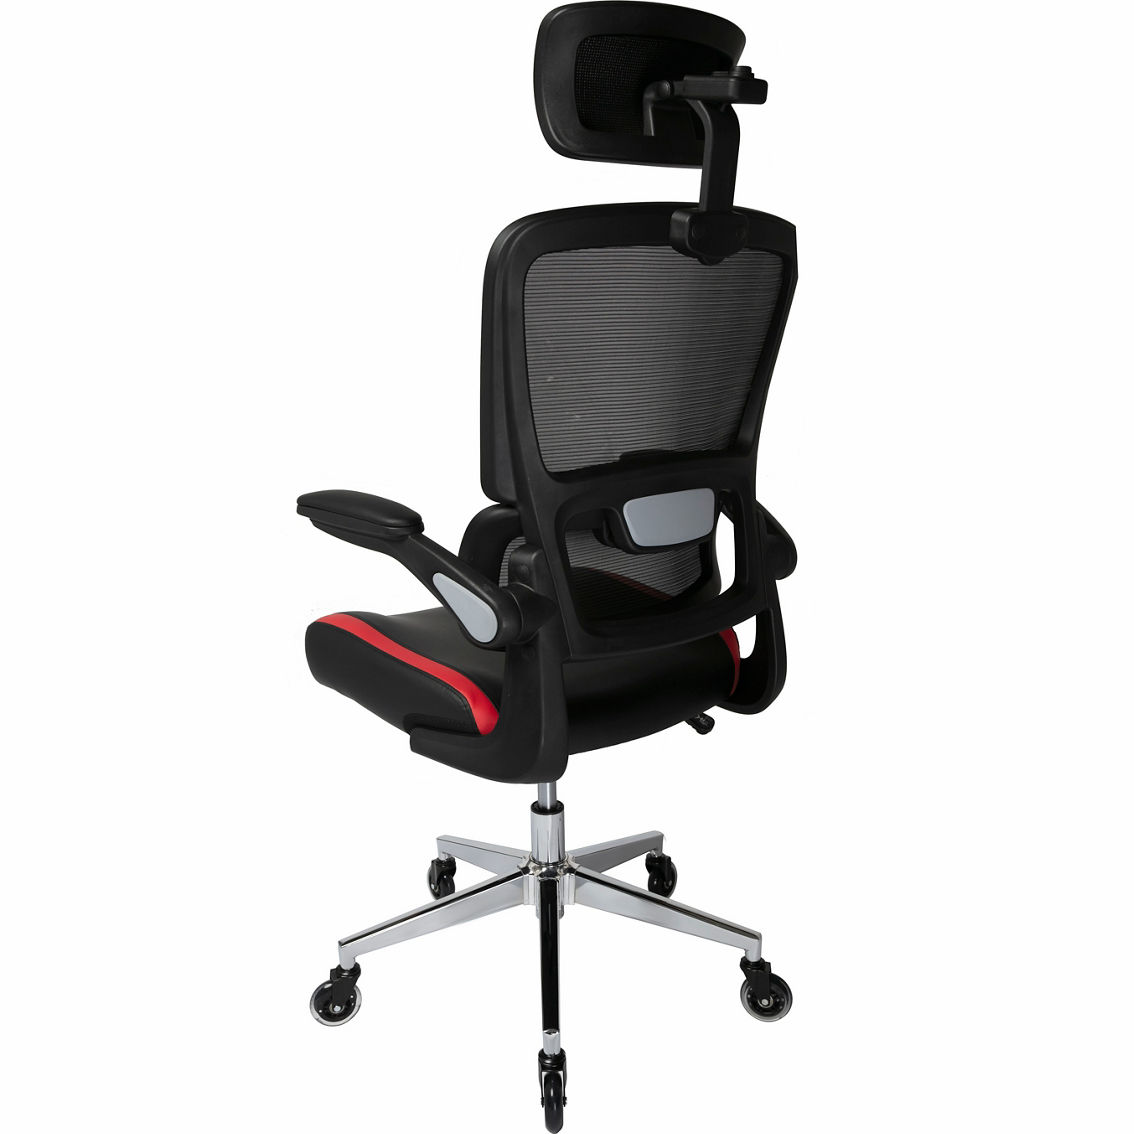 Simply Perfect Mesh Office Chair with Headrest - Image 8 of 10